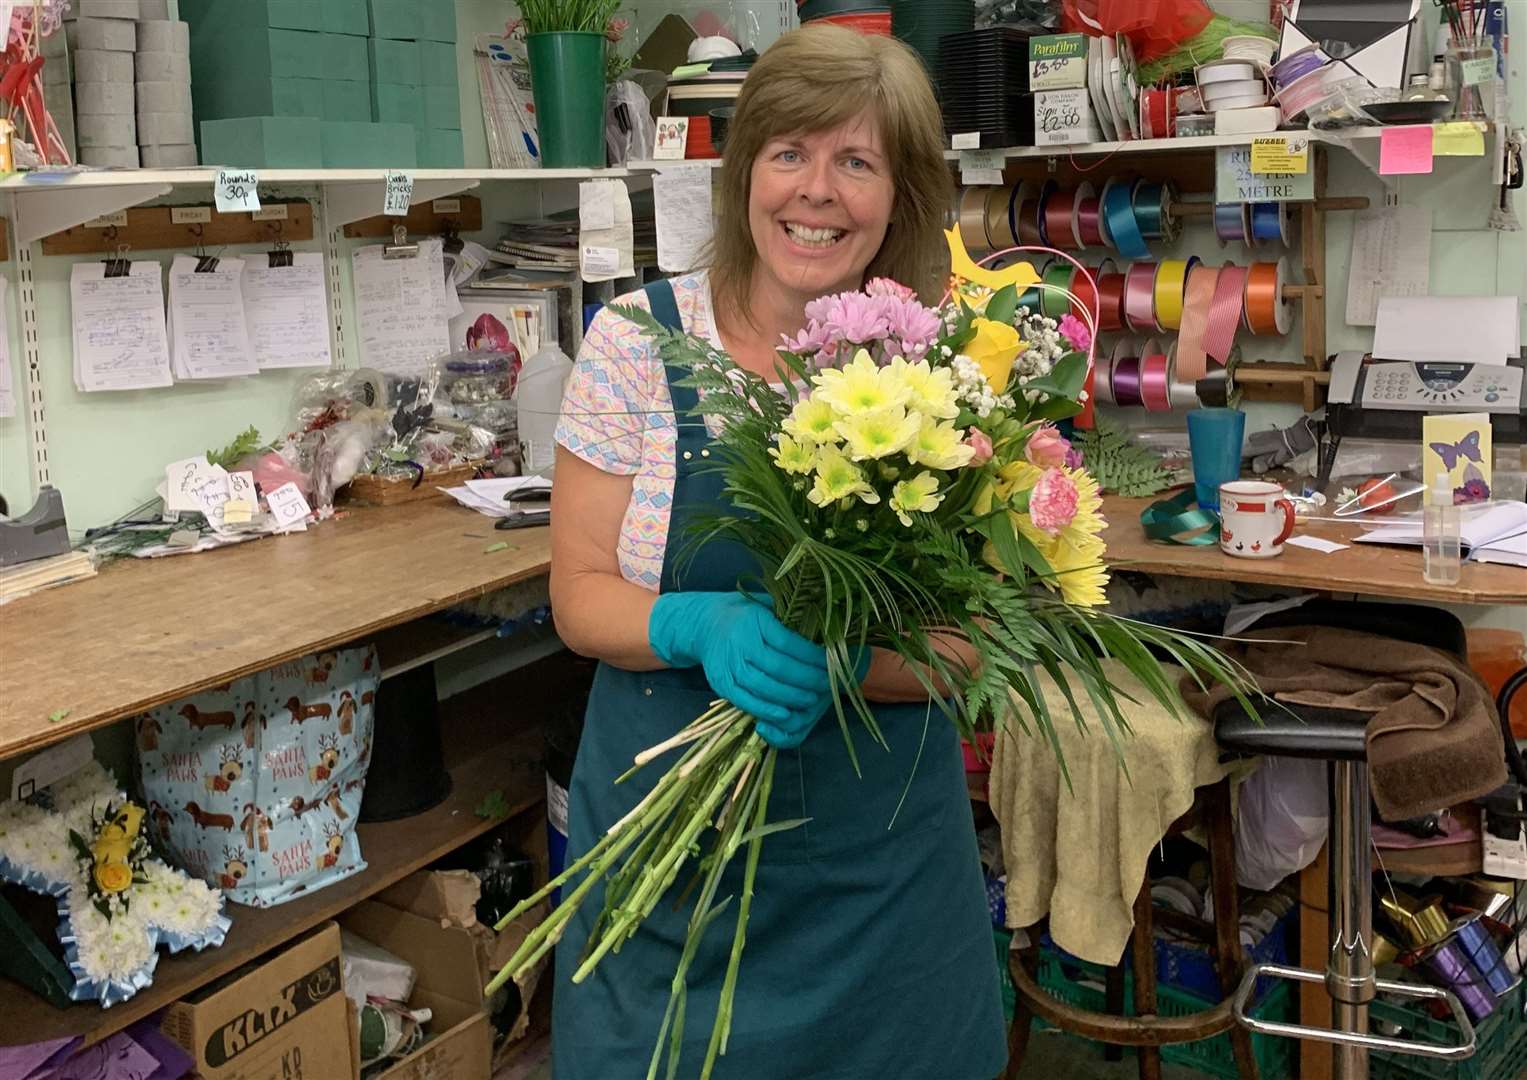 Sue Probert, manager of Daisy Chains Florists in Sheerness High Street